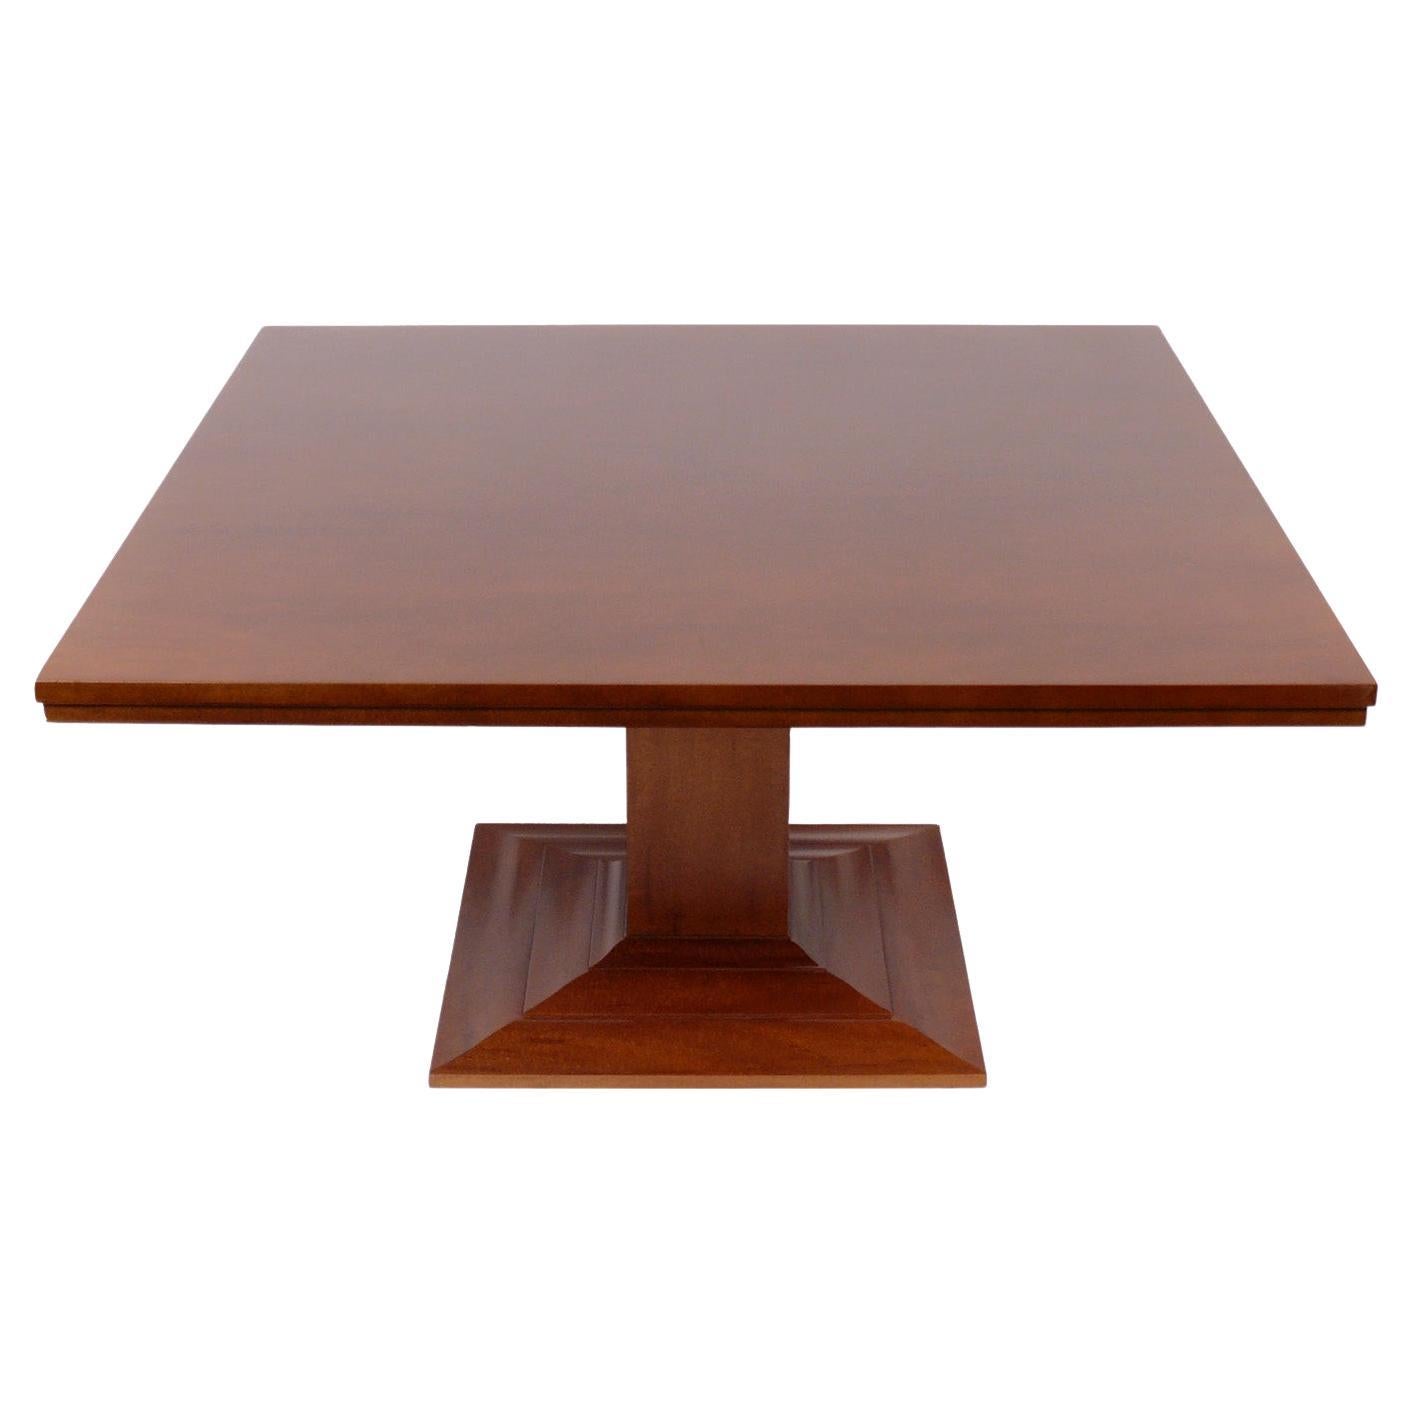 Frank Pollaro Custom Large Square Dining Table For Sale